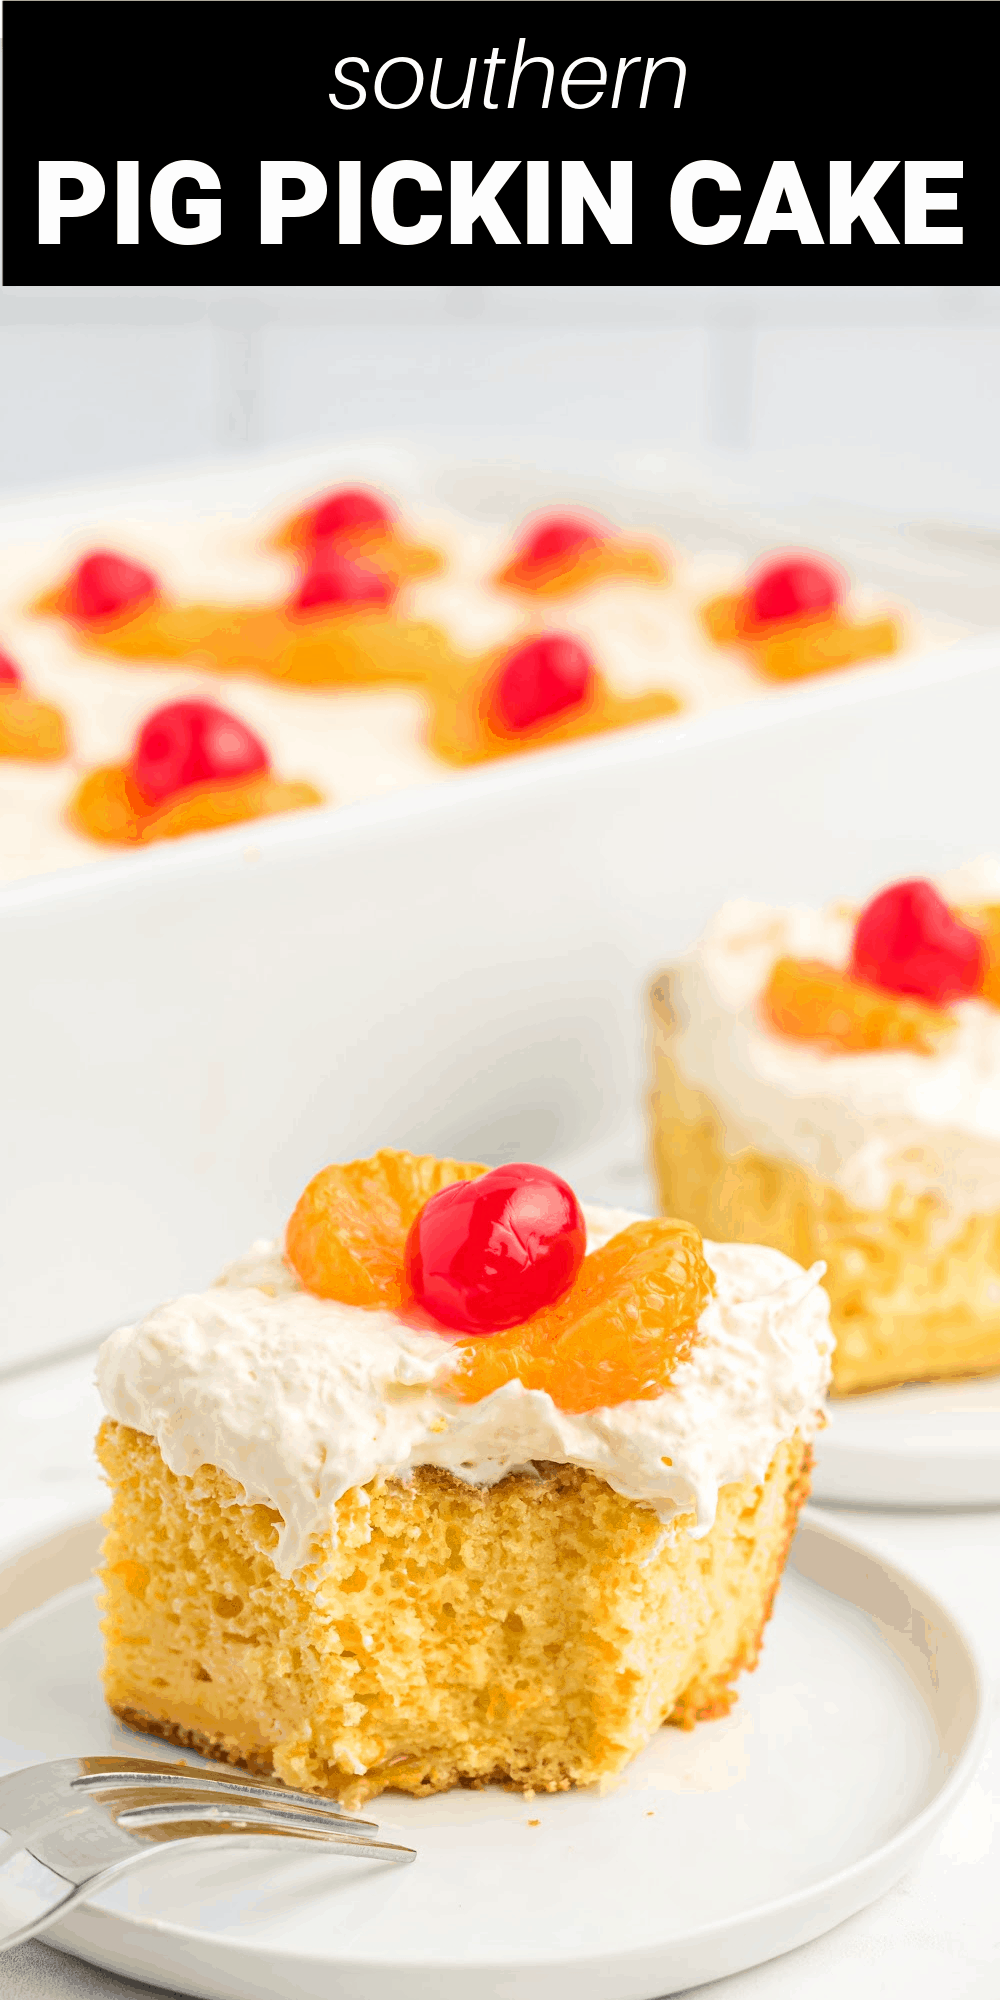 Pig Pickin Cake is a classic moist and delicious mandarin orange cake that's topped with a whipped cream and crushed pineapple frosting making it a light and refreshing dessert that's perfect for summer barbeques, family reunions, and the Fourth of July.